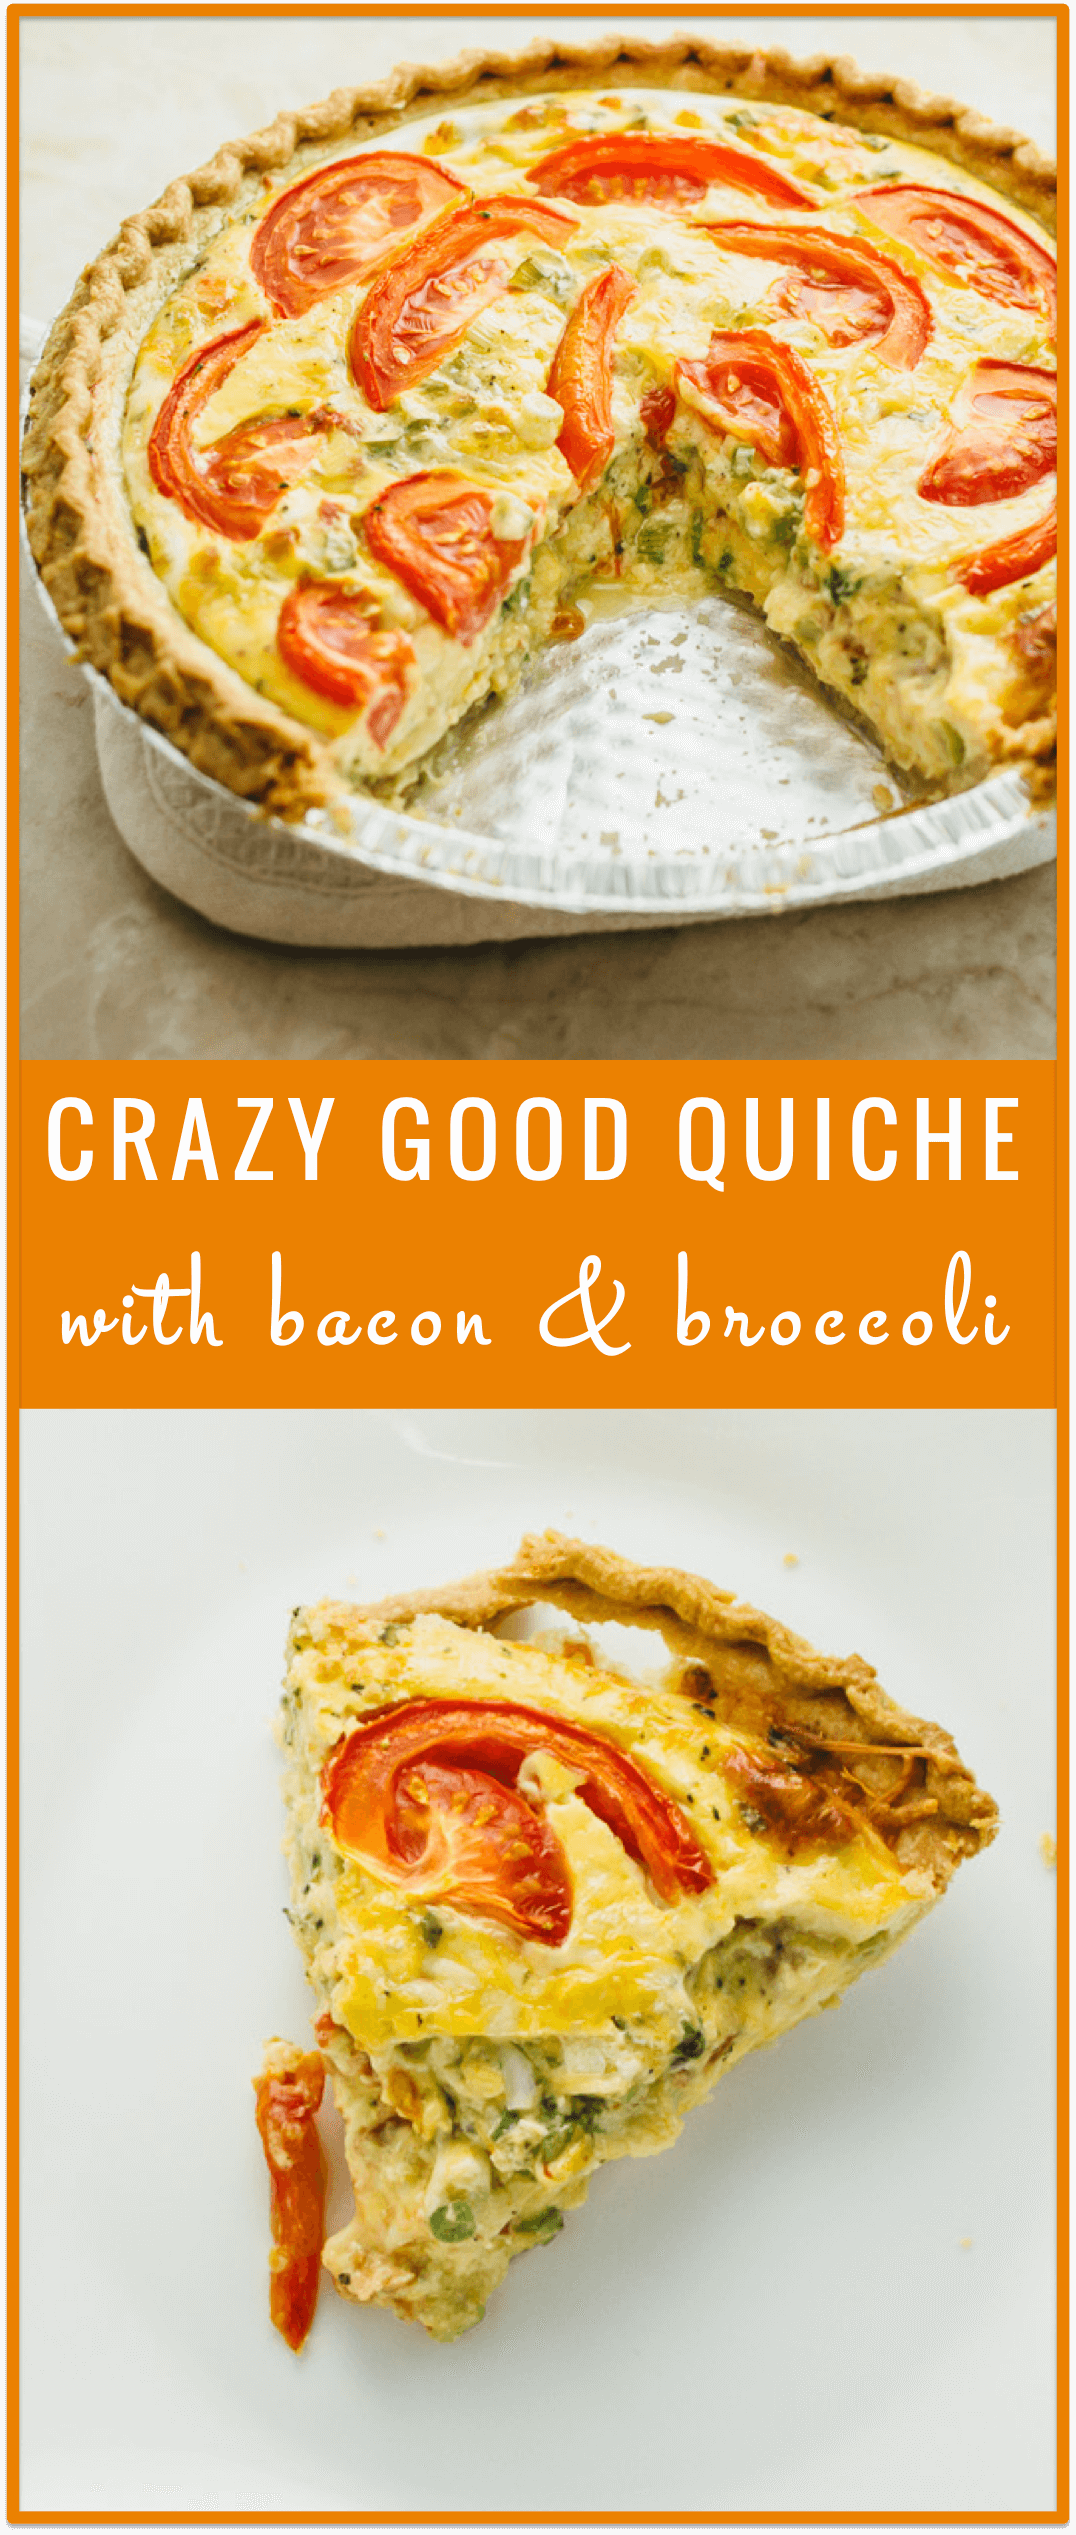 Crazy good quiche with bacon, broccoli, and tomato - Savory Tooth